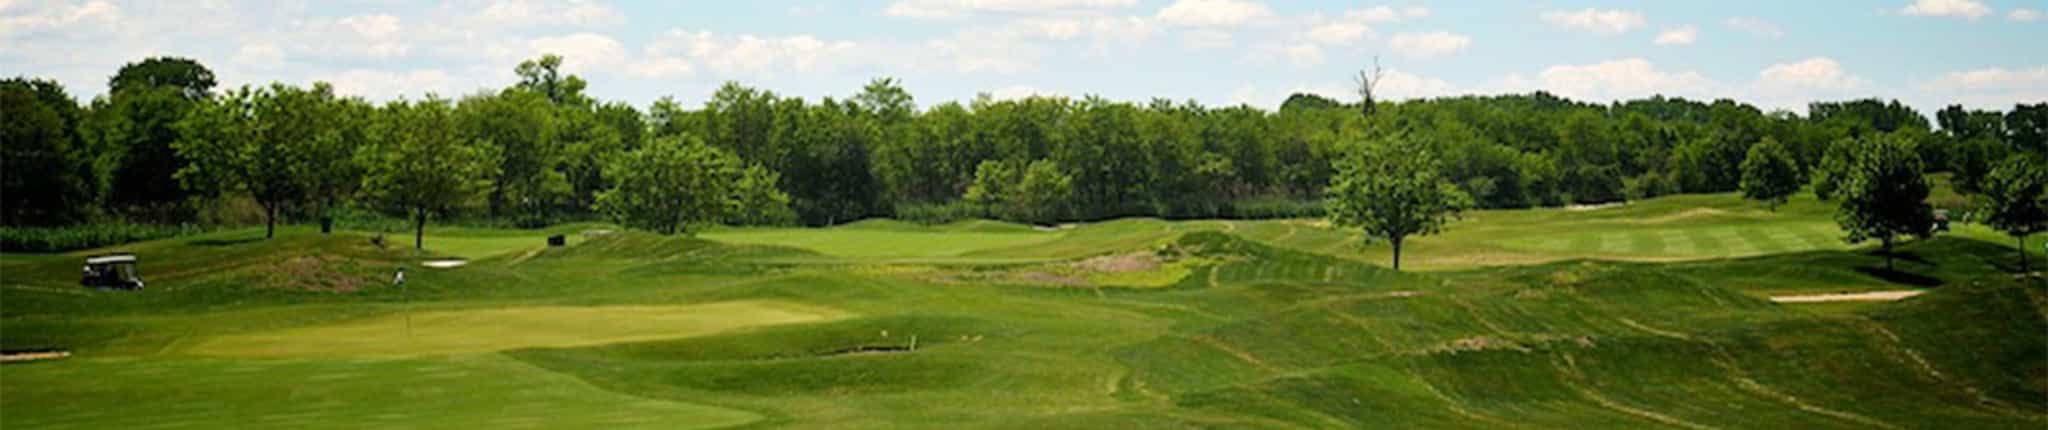 Golf & Country Clubs - Visit South Jersey